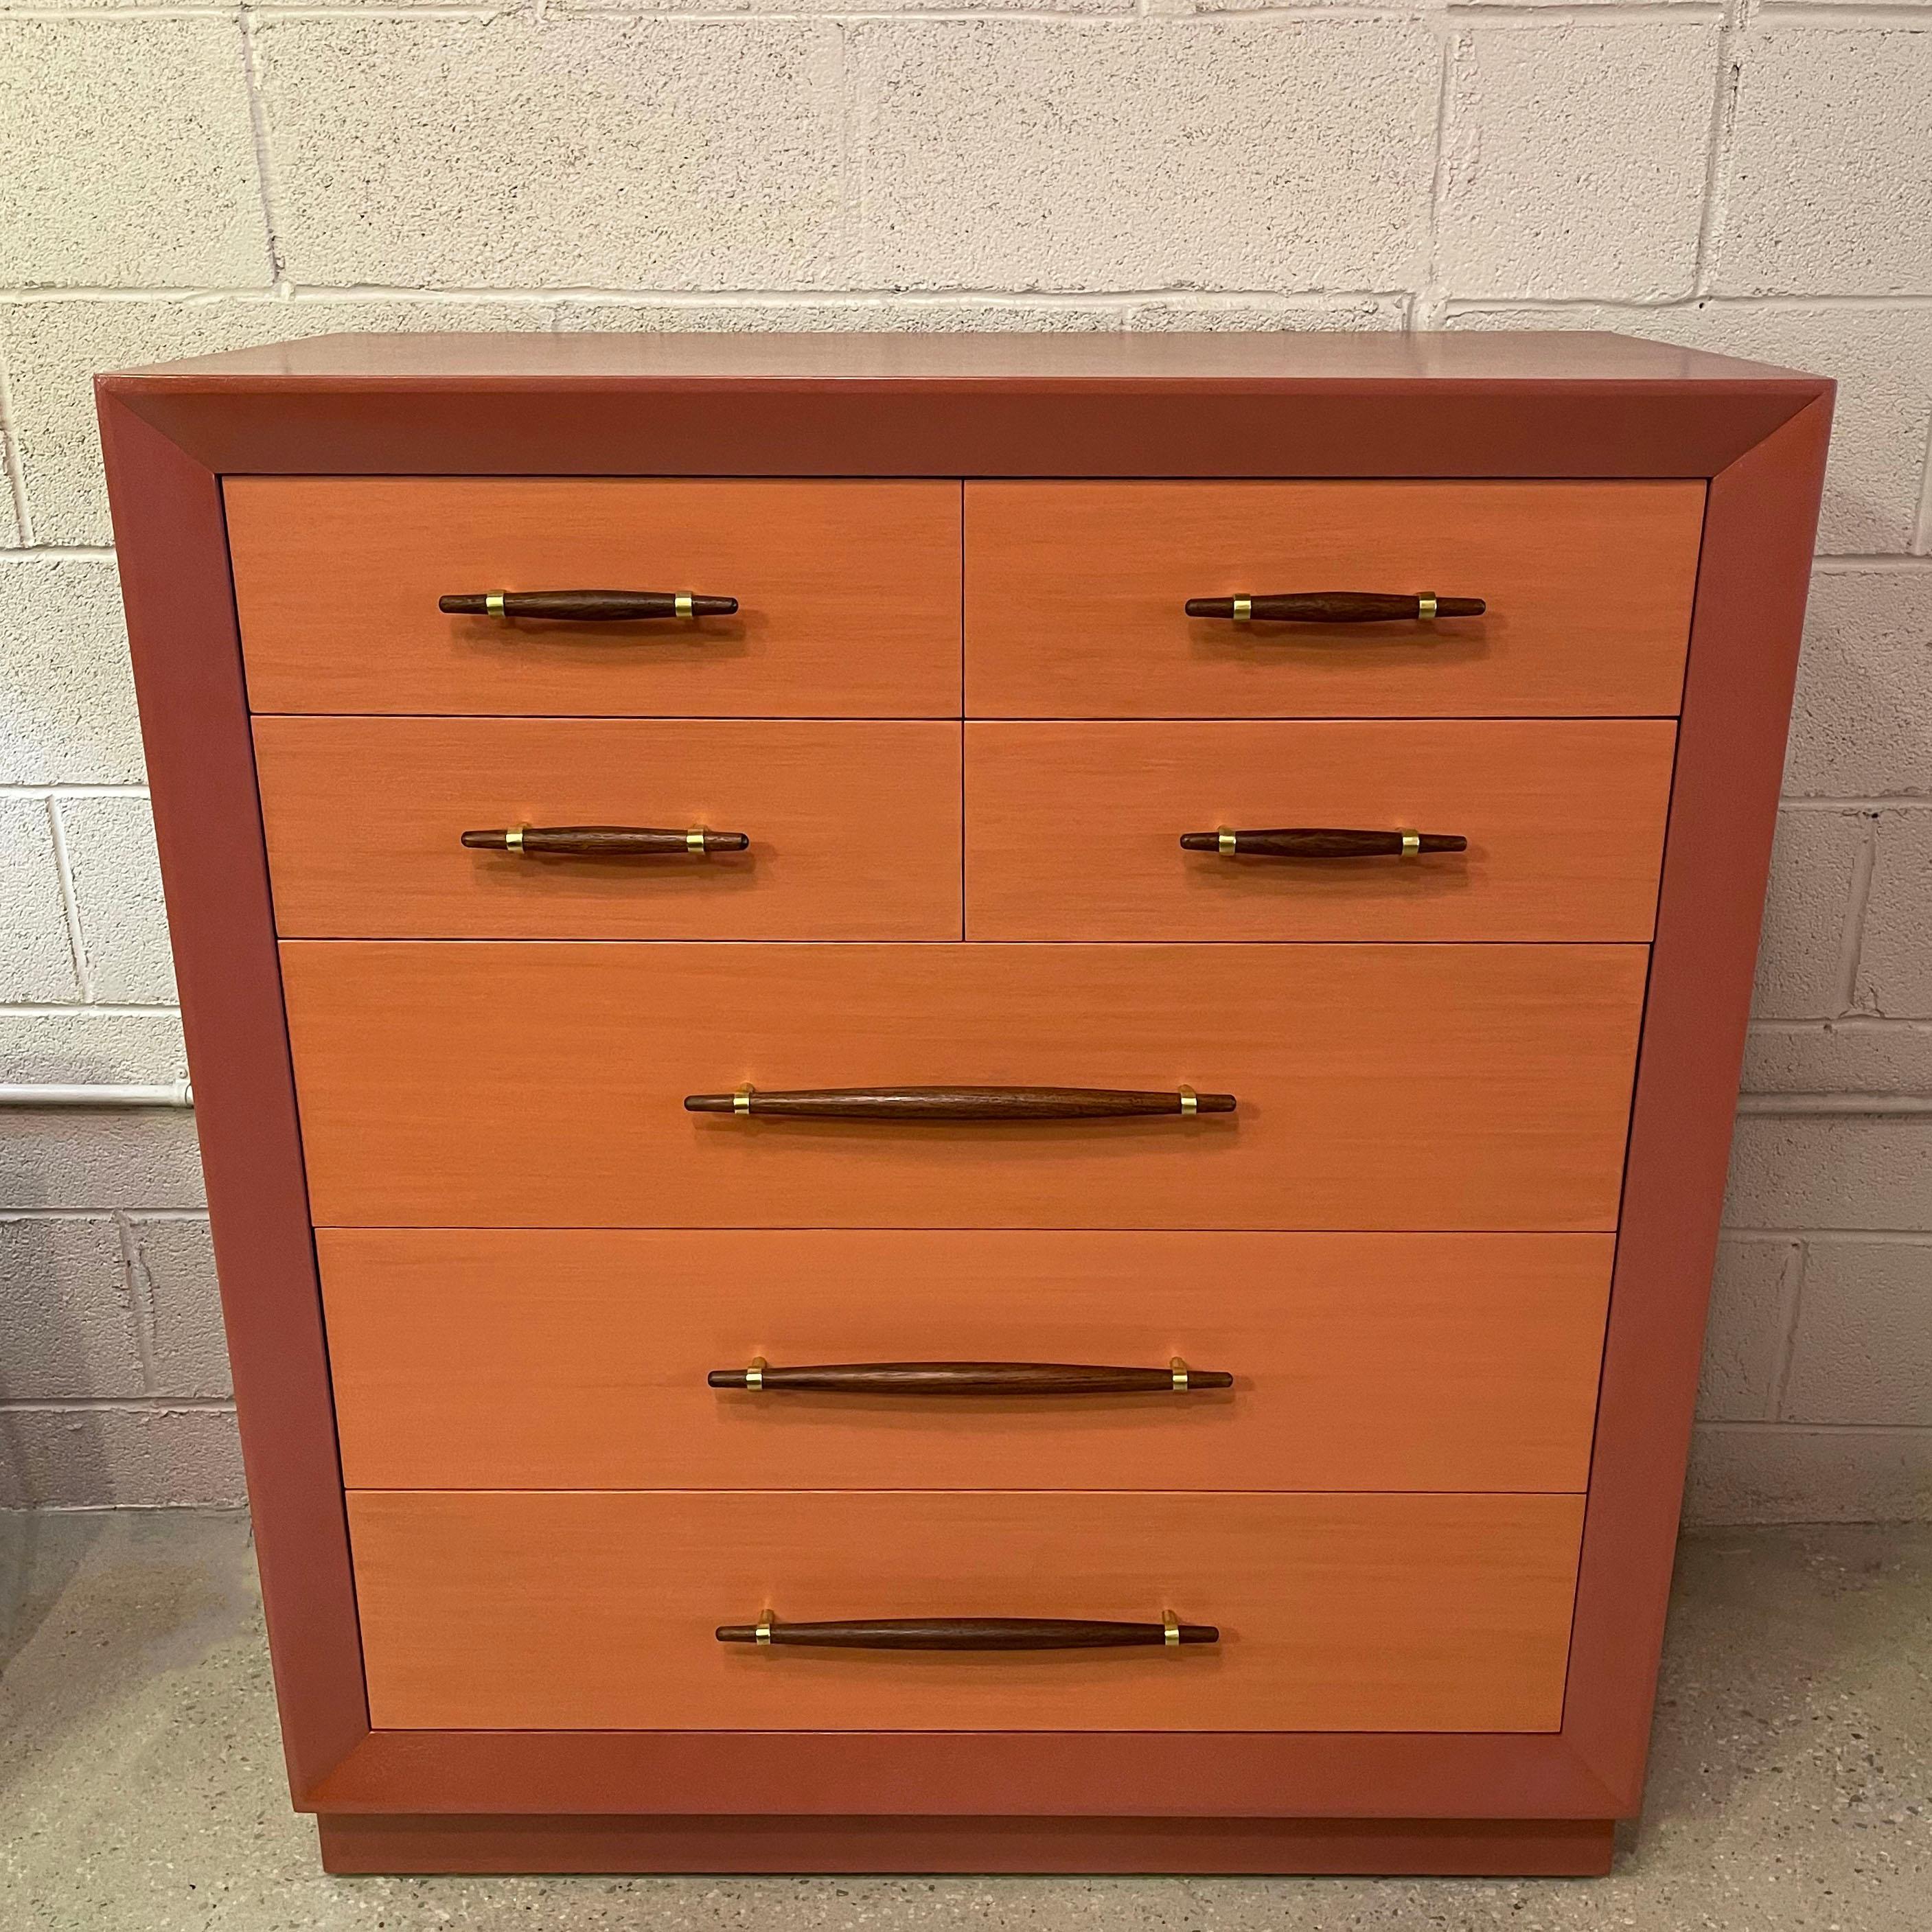 Outstanding, mid-century, Hollywood regency, mahogany dresser by John Stuart features a custom finish with opaque blush, beveled edge surround and contrasting coral stained drawers that allows some grain to show through with stained mahogany pulls